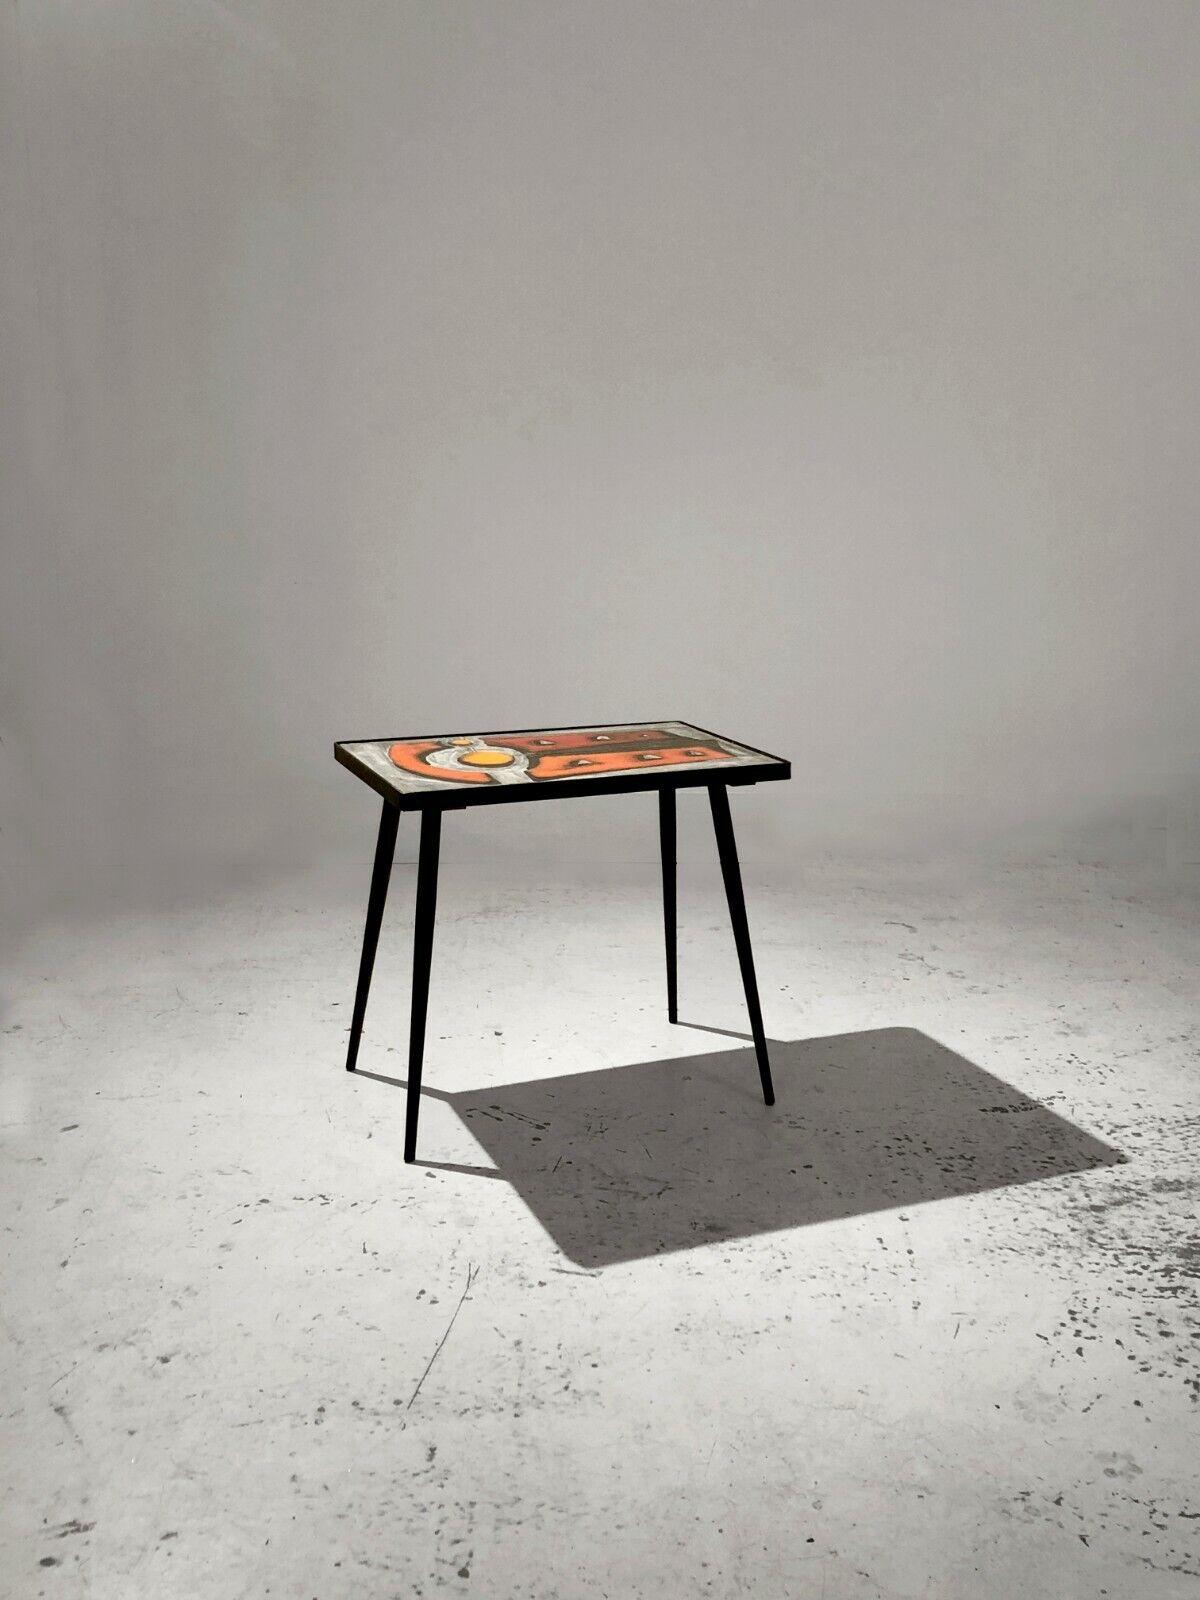 A small coffee table or a side table or a headboard, Modernist, Geometrical Abstraction, Lyrical Abstraction, Forme-Libre; dynamic structure in wrought iron, with a pictorial top in enameled lava stone depicting an abstract scenery made with light